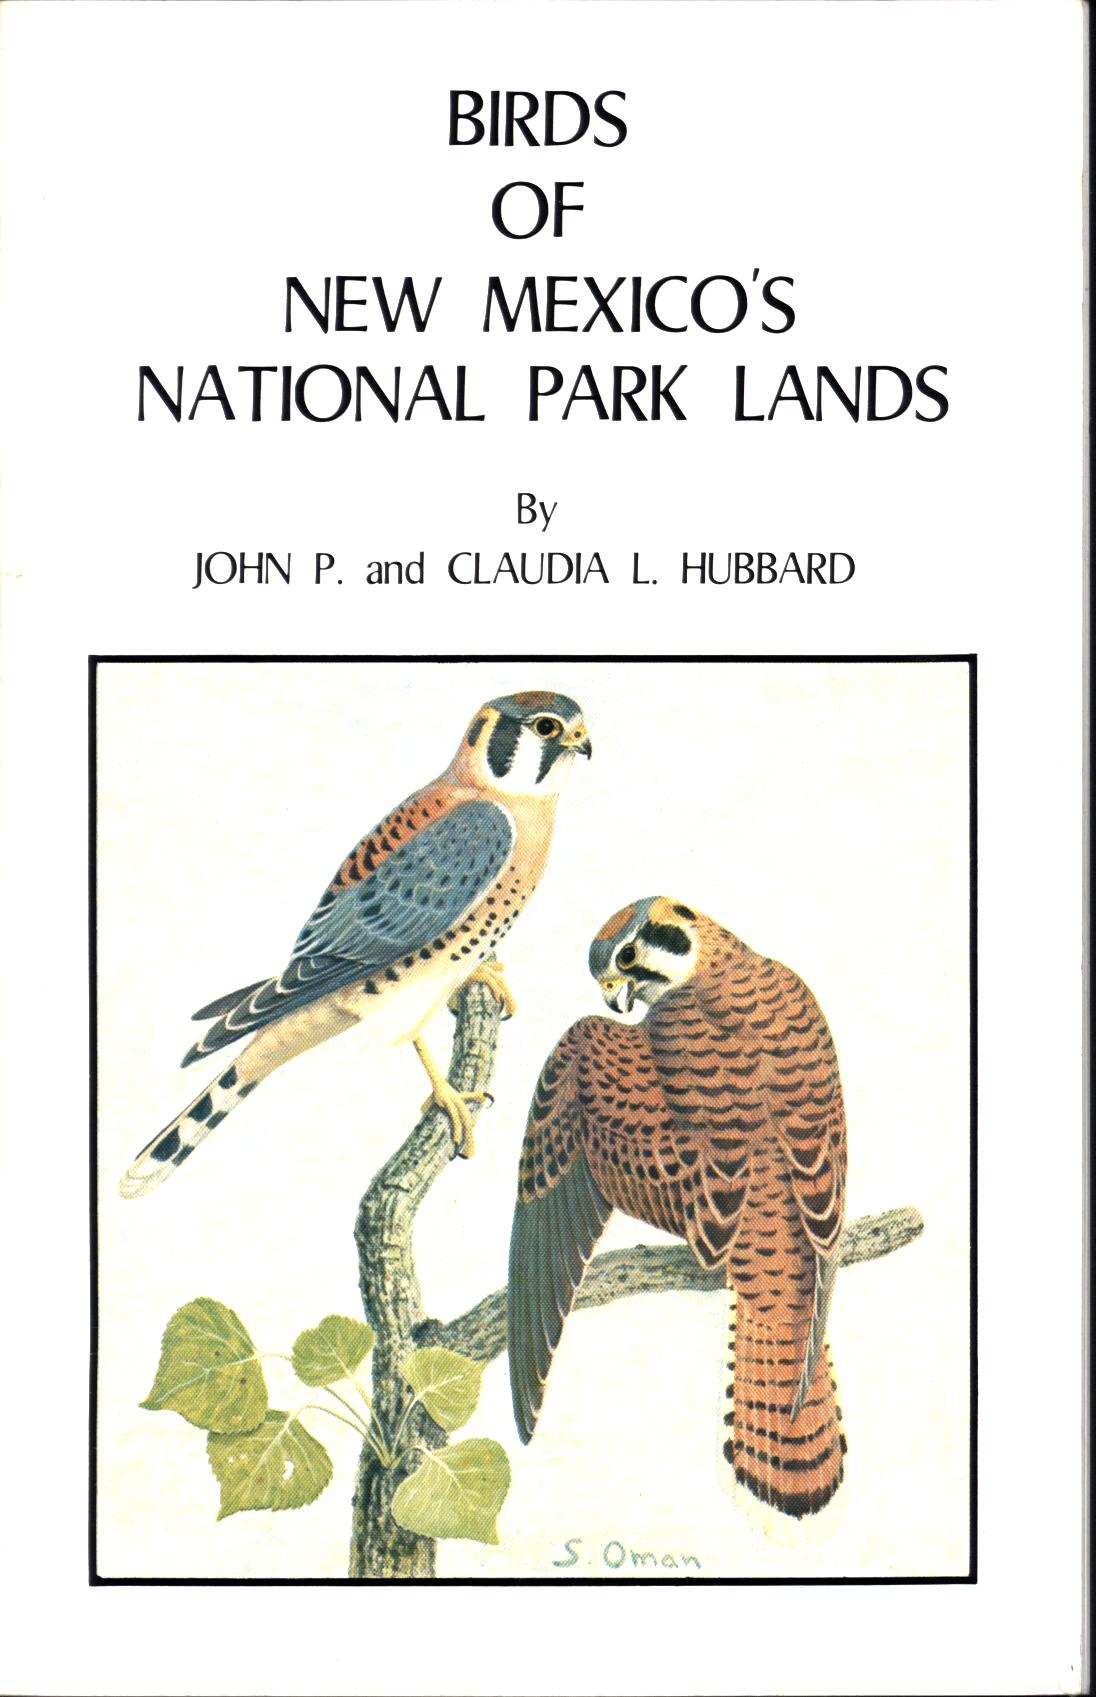 BIRDS OF NEW MEXICO'S NATIONAL PARK LANDS. 